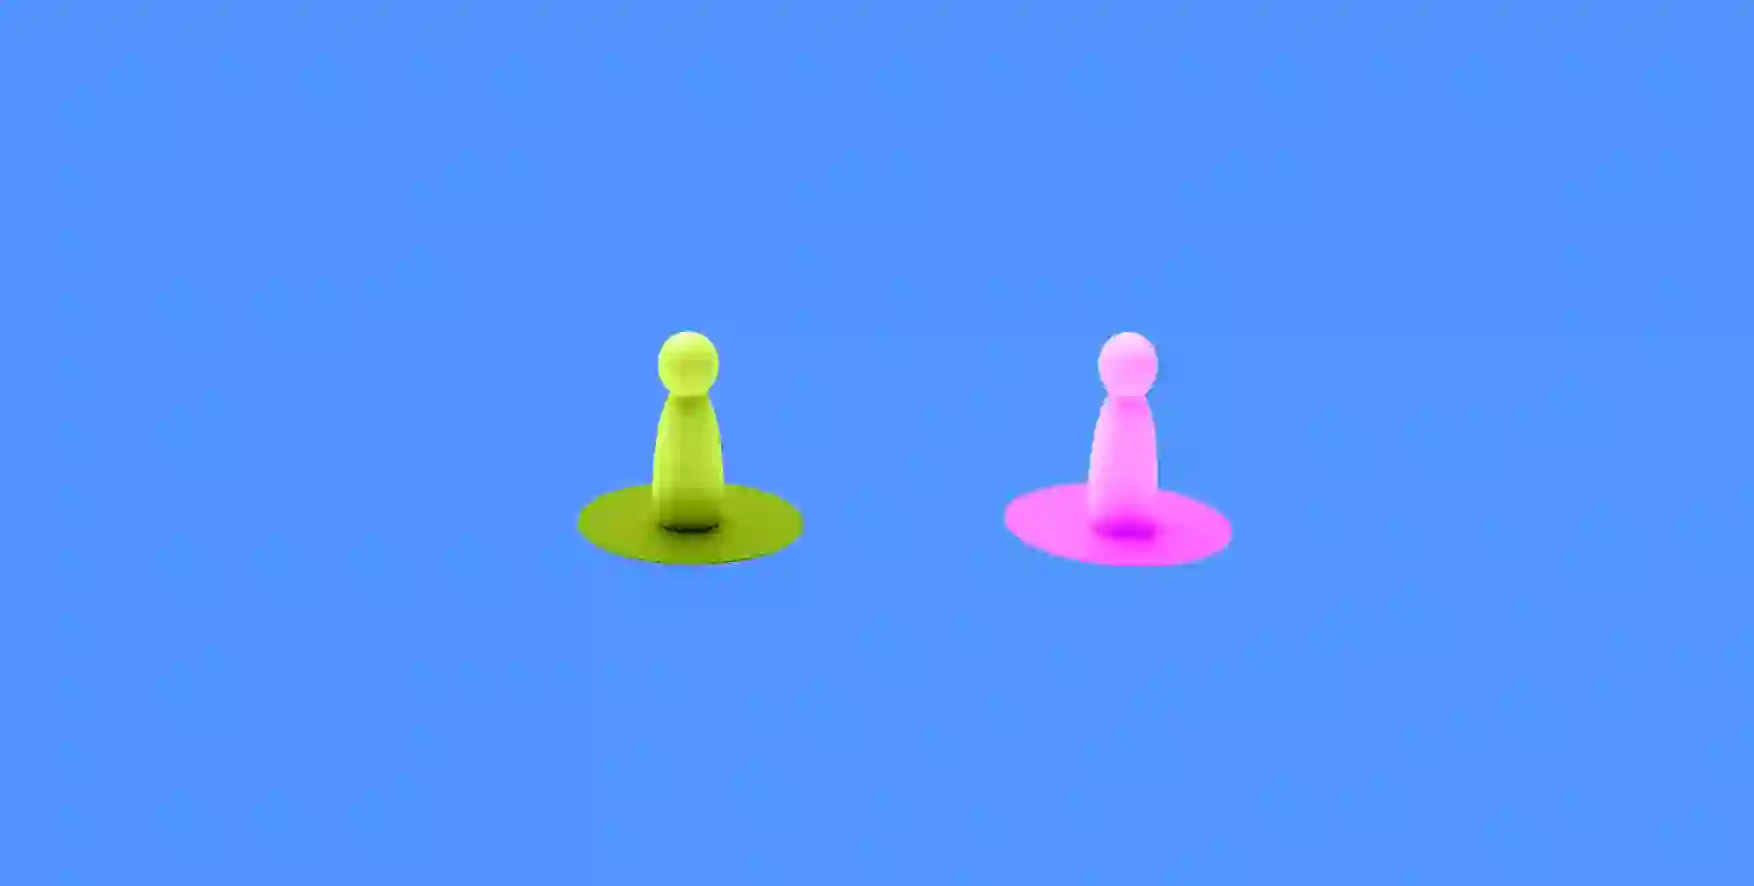 red and blue figurines on blue background